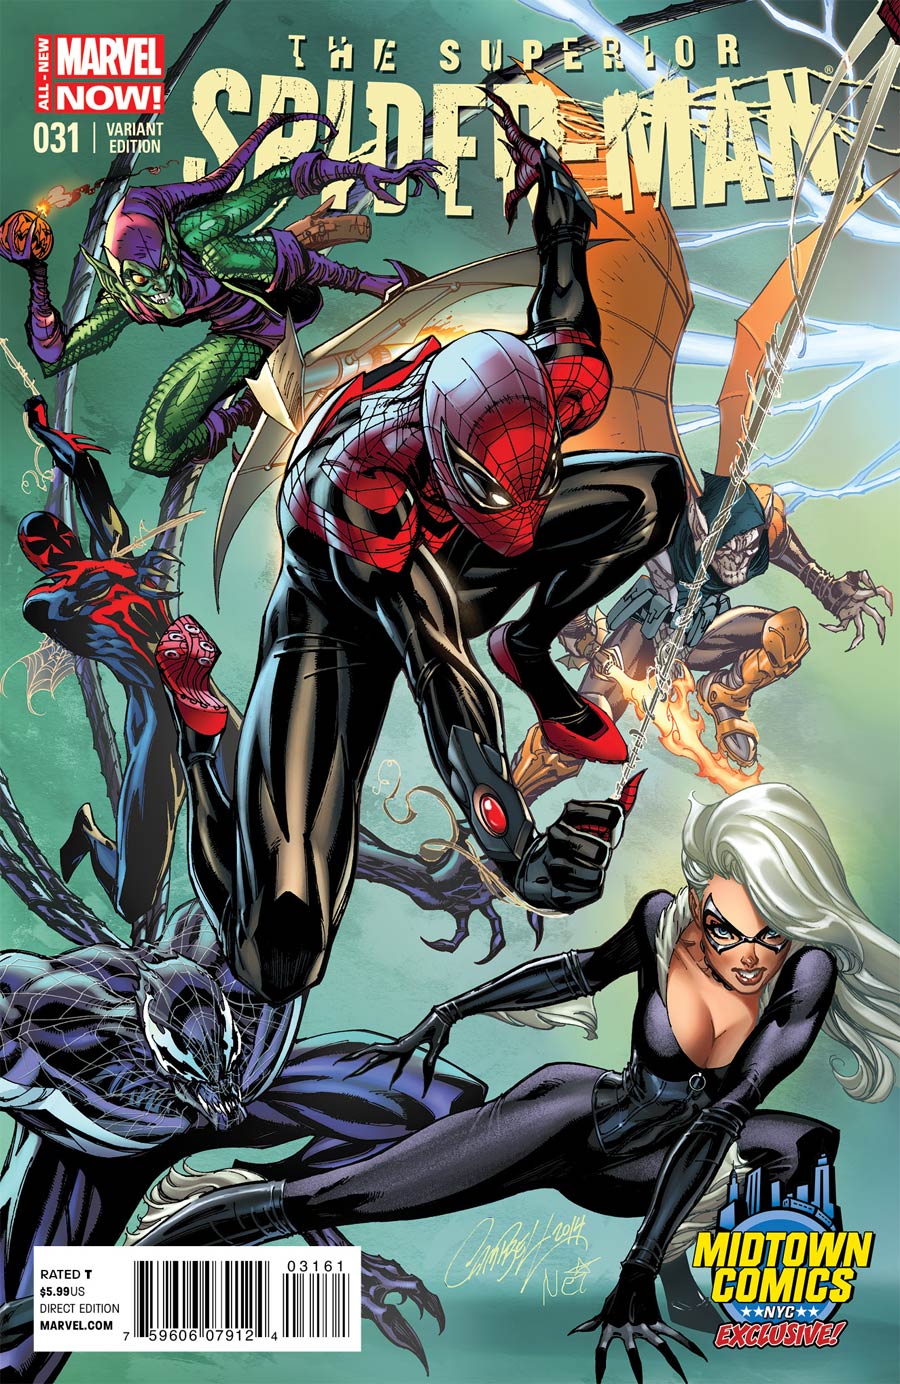 Superior Spider-Man #31 Cover B Midtown Exclusive J Scott Campbell Connecting Color Variant Cover (1 of 3)